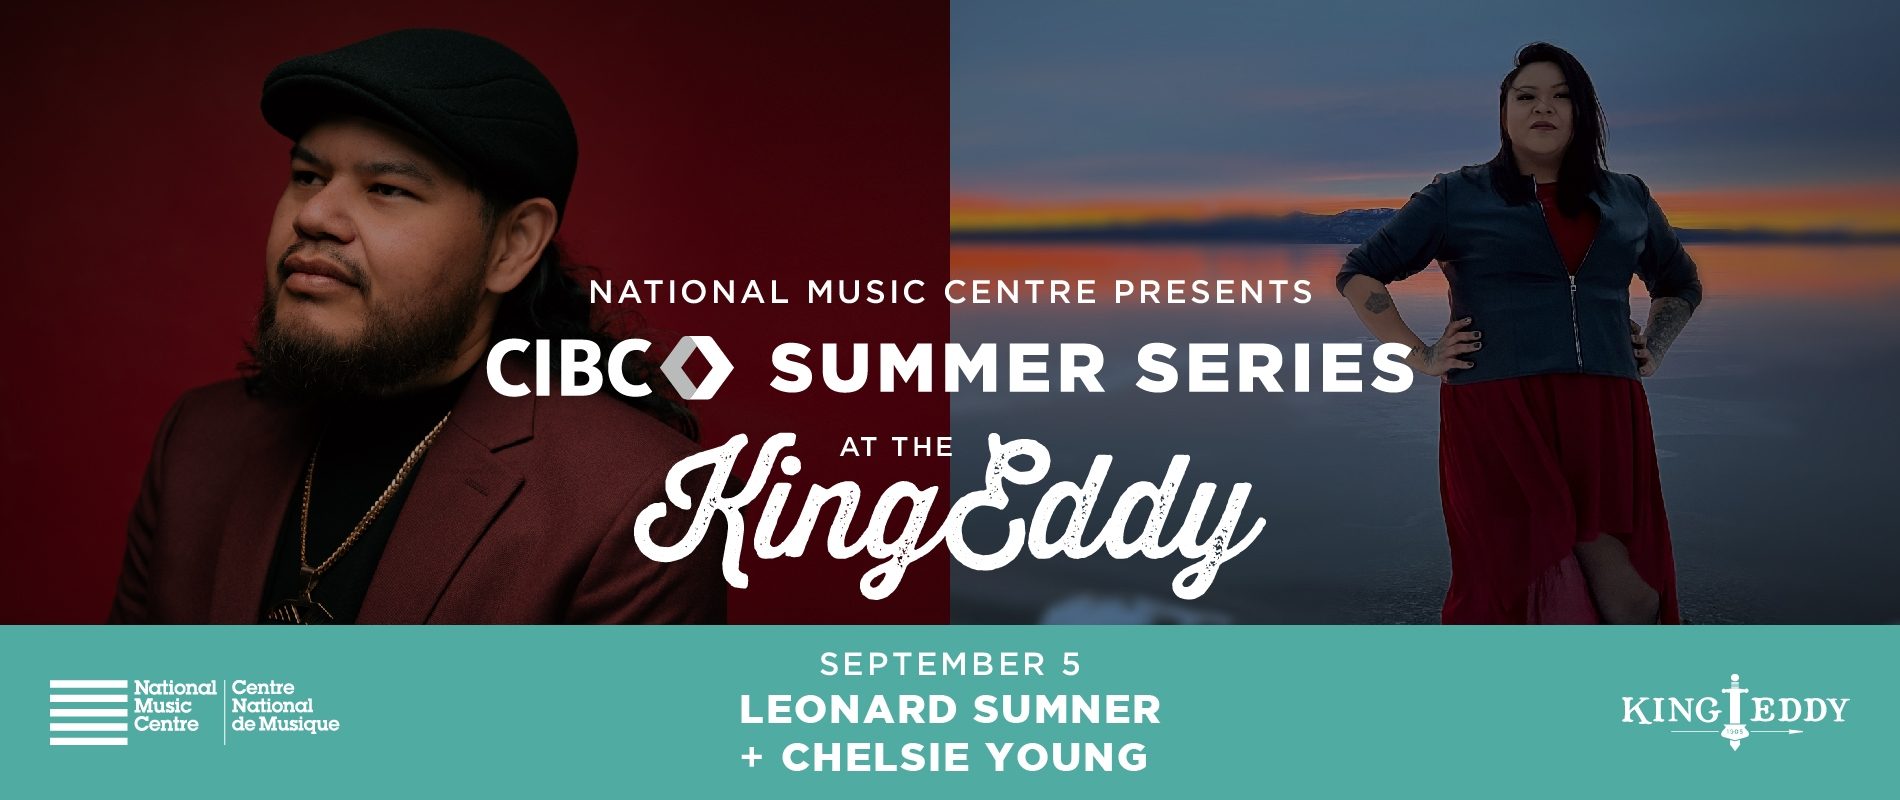 NMC Presents: CIBC Summer Series at the King Eddy — Leonard Sumner with Chelsie Young